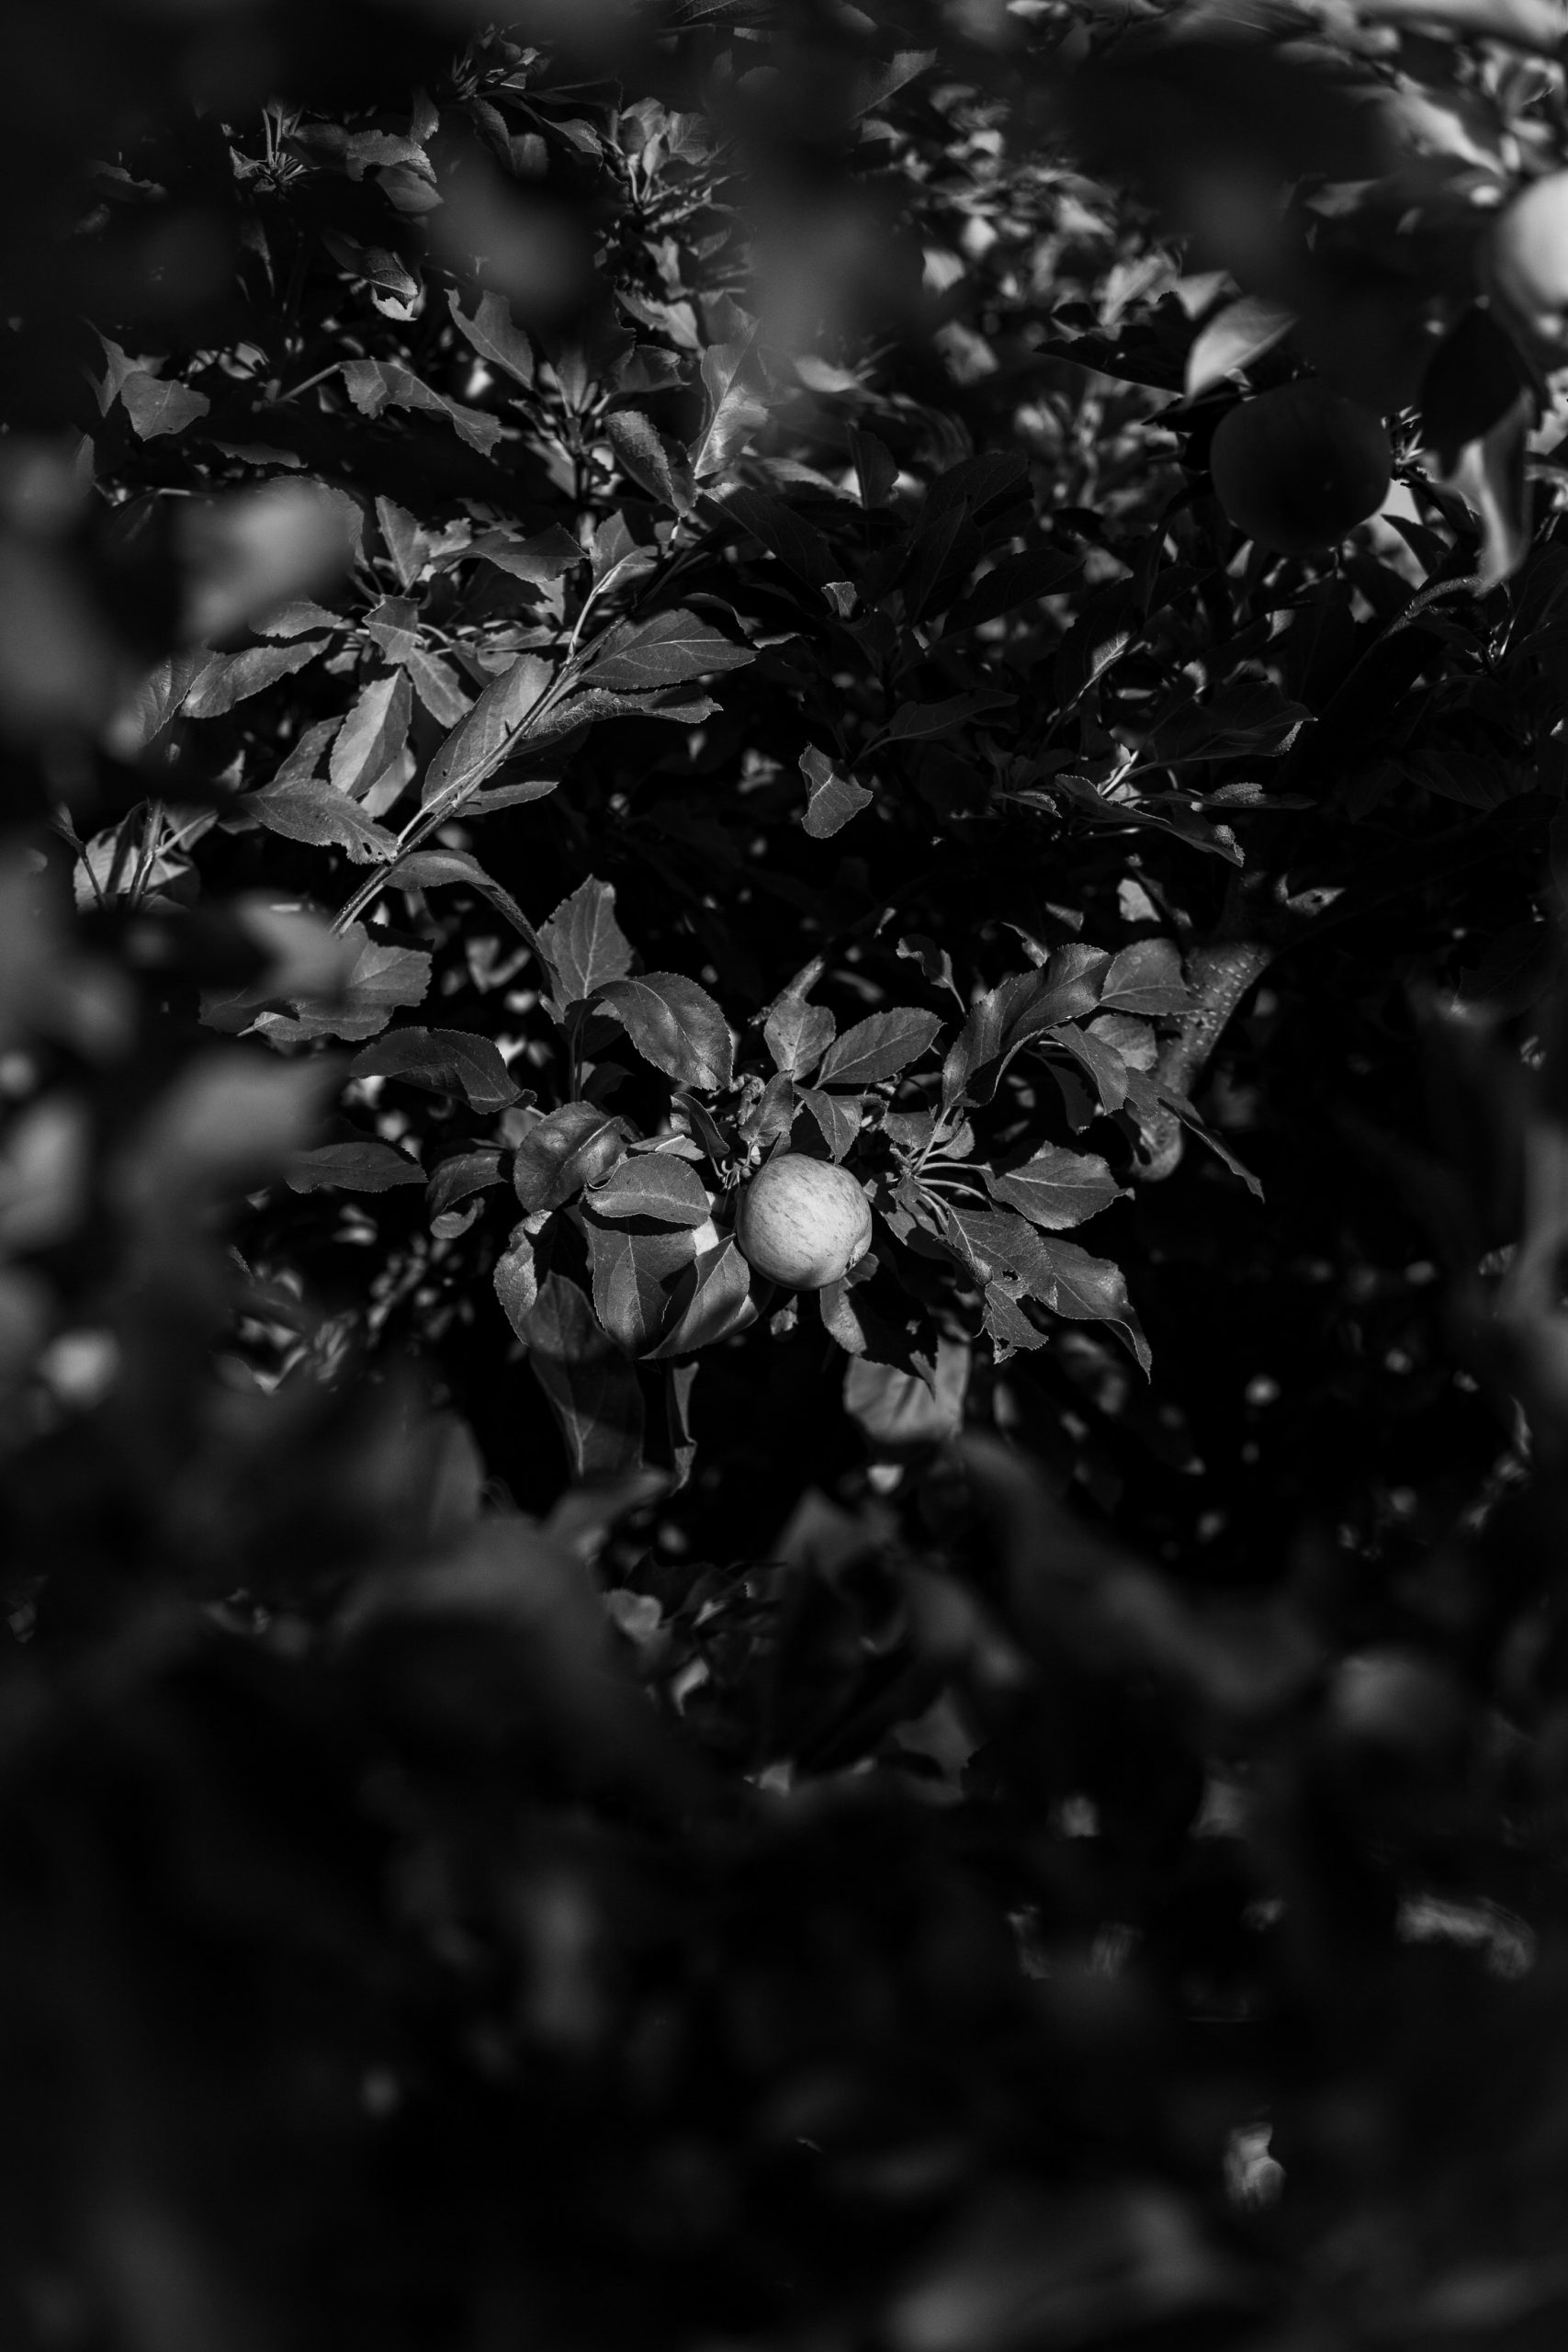 black and white image of an apple hidden high up in a tree